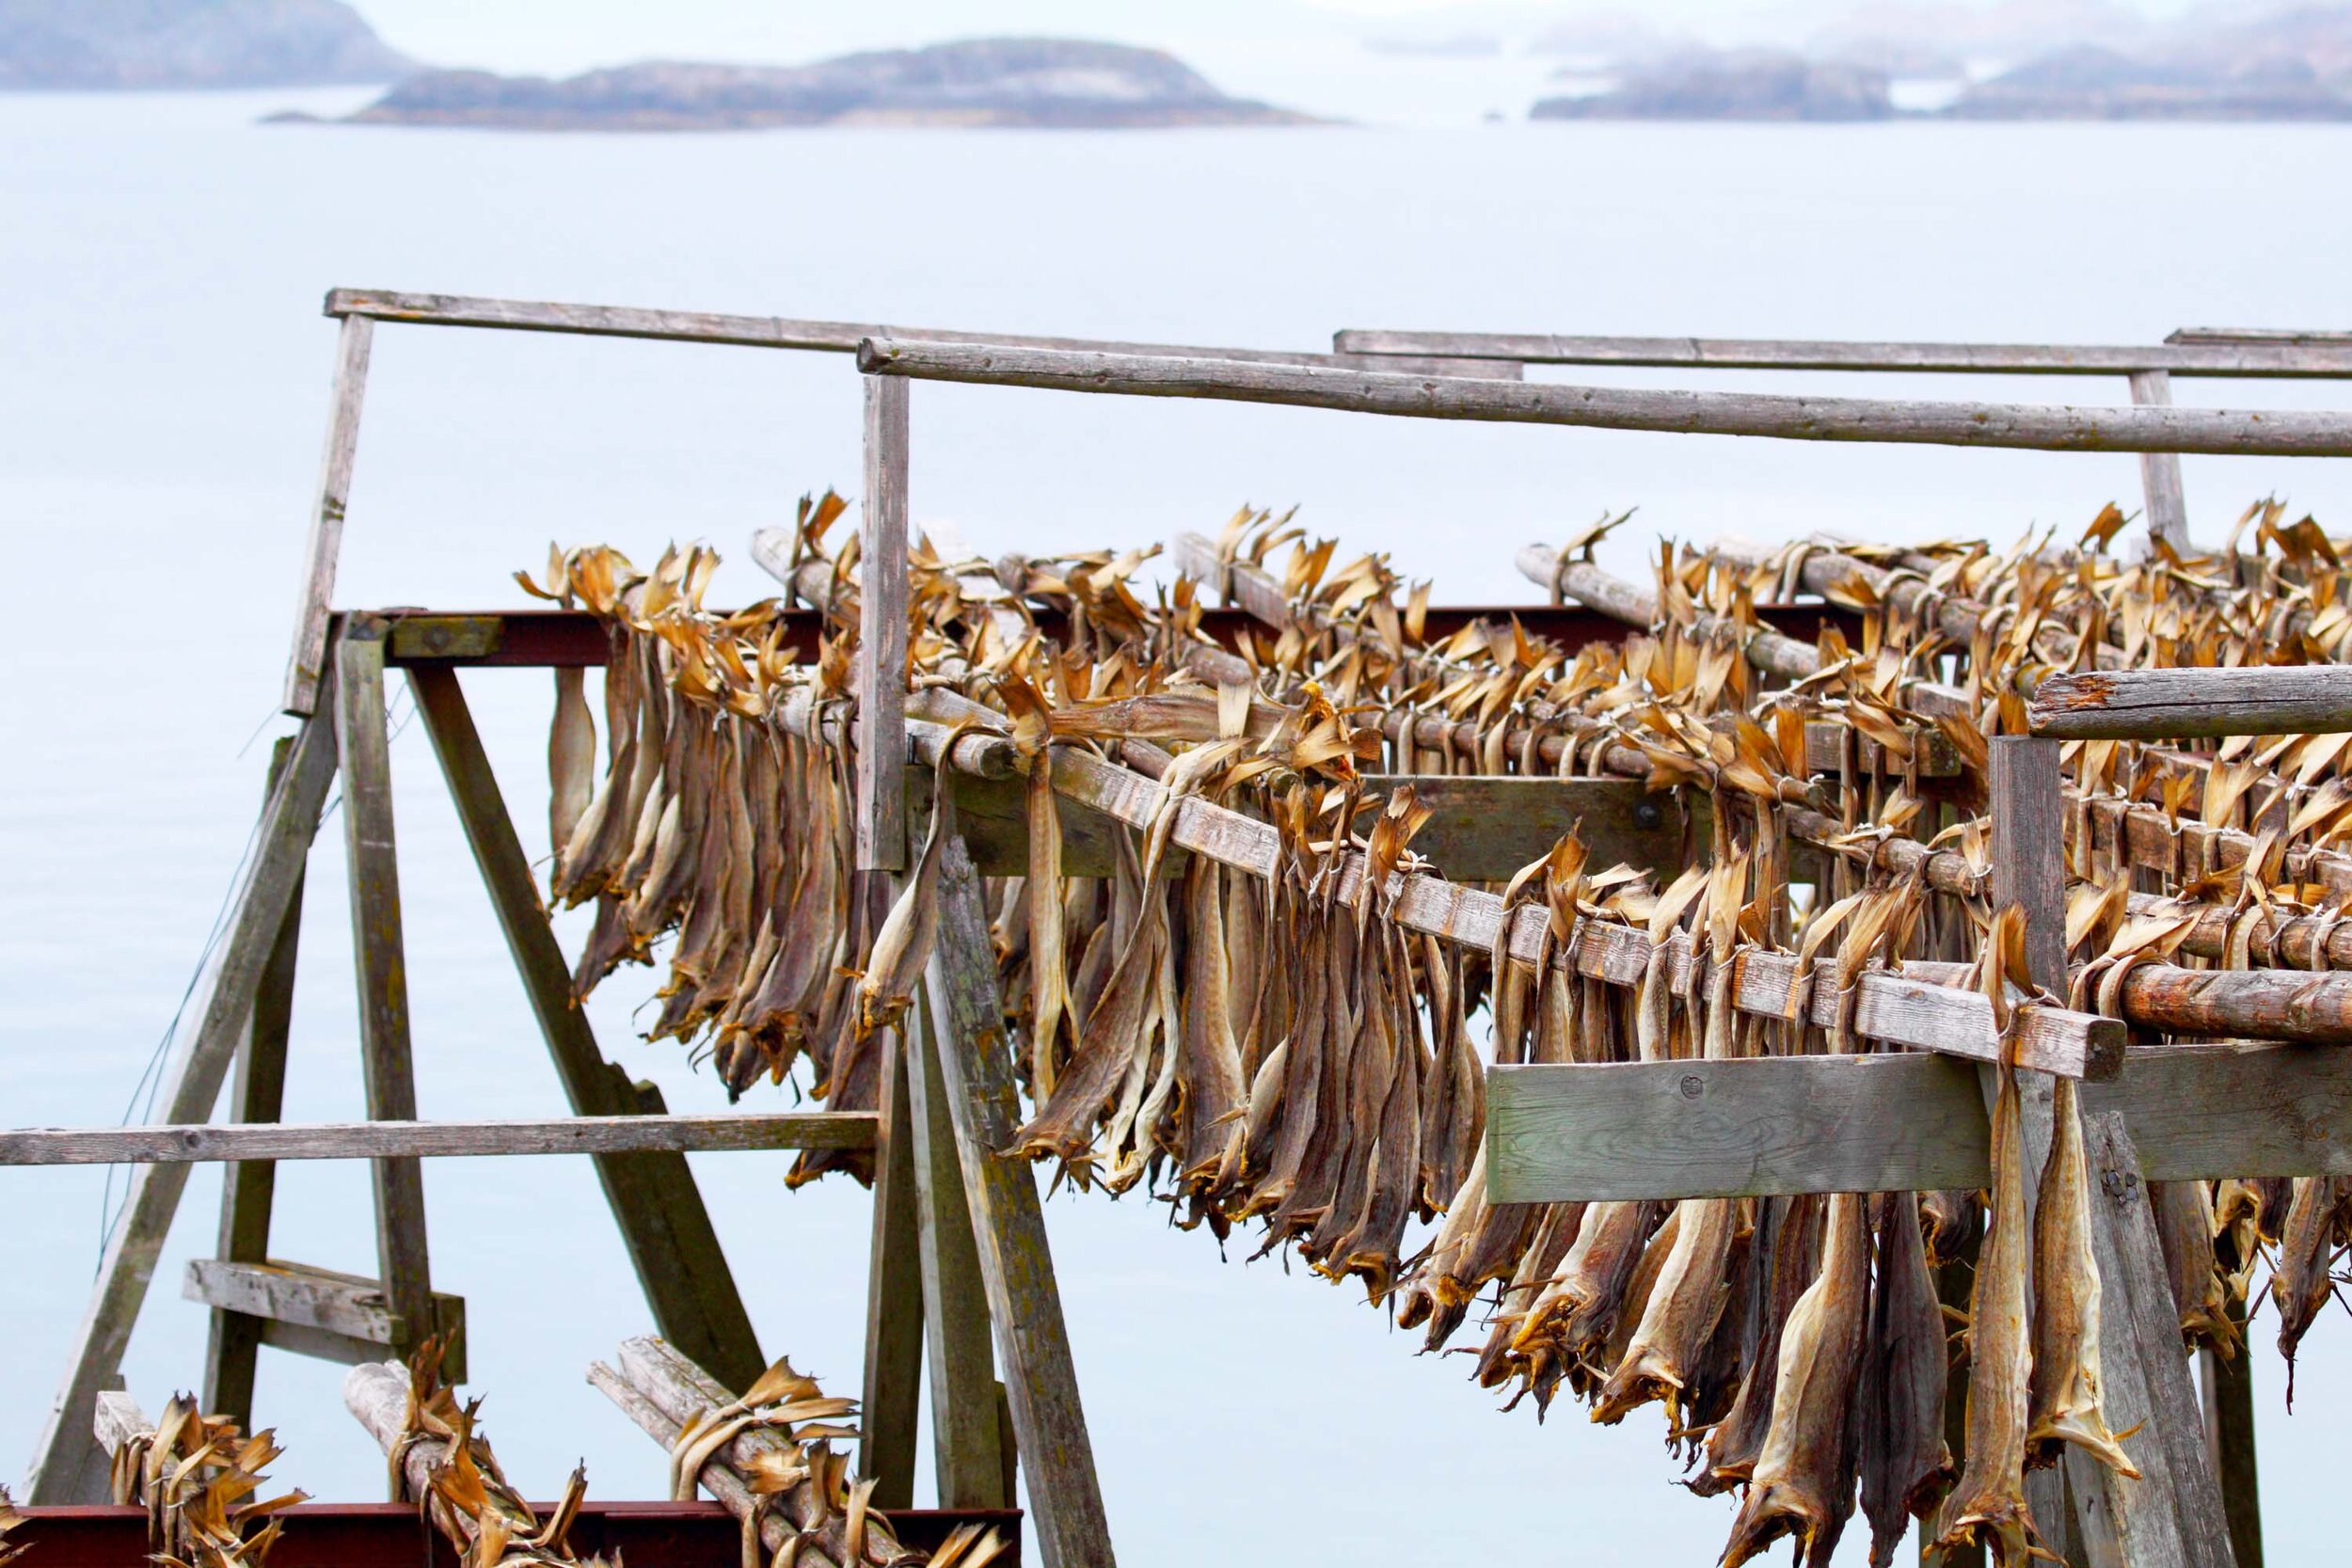 DryFish of Norway®  High quality Stockfish from Norway – Dryfish of Norway